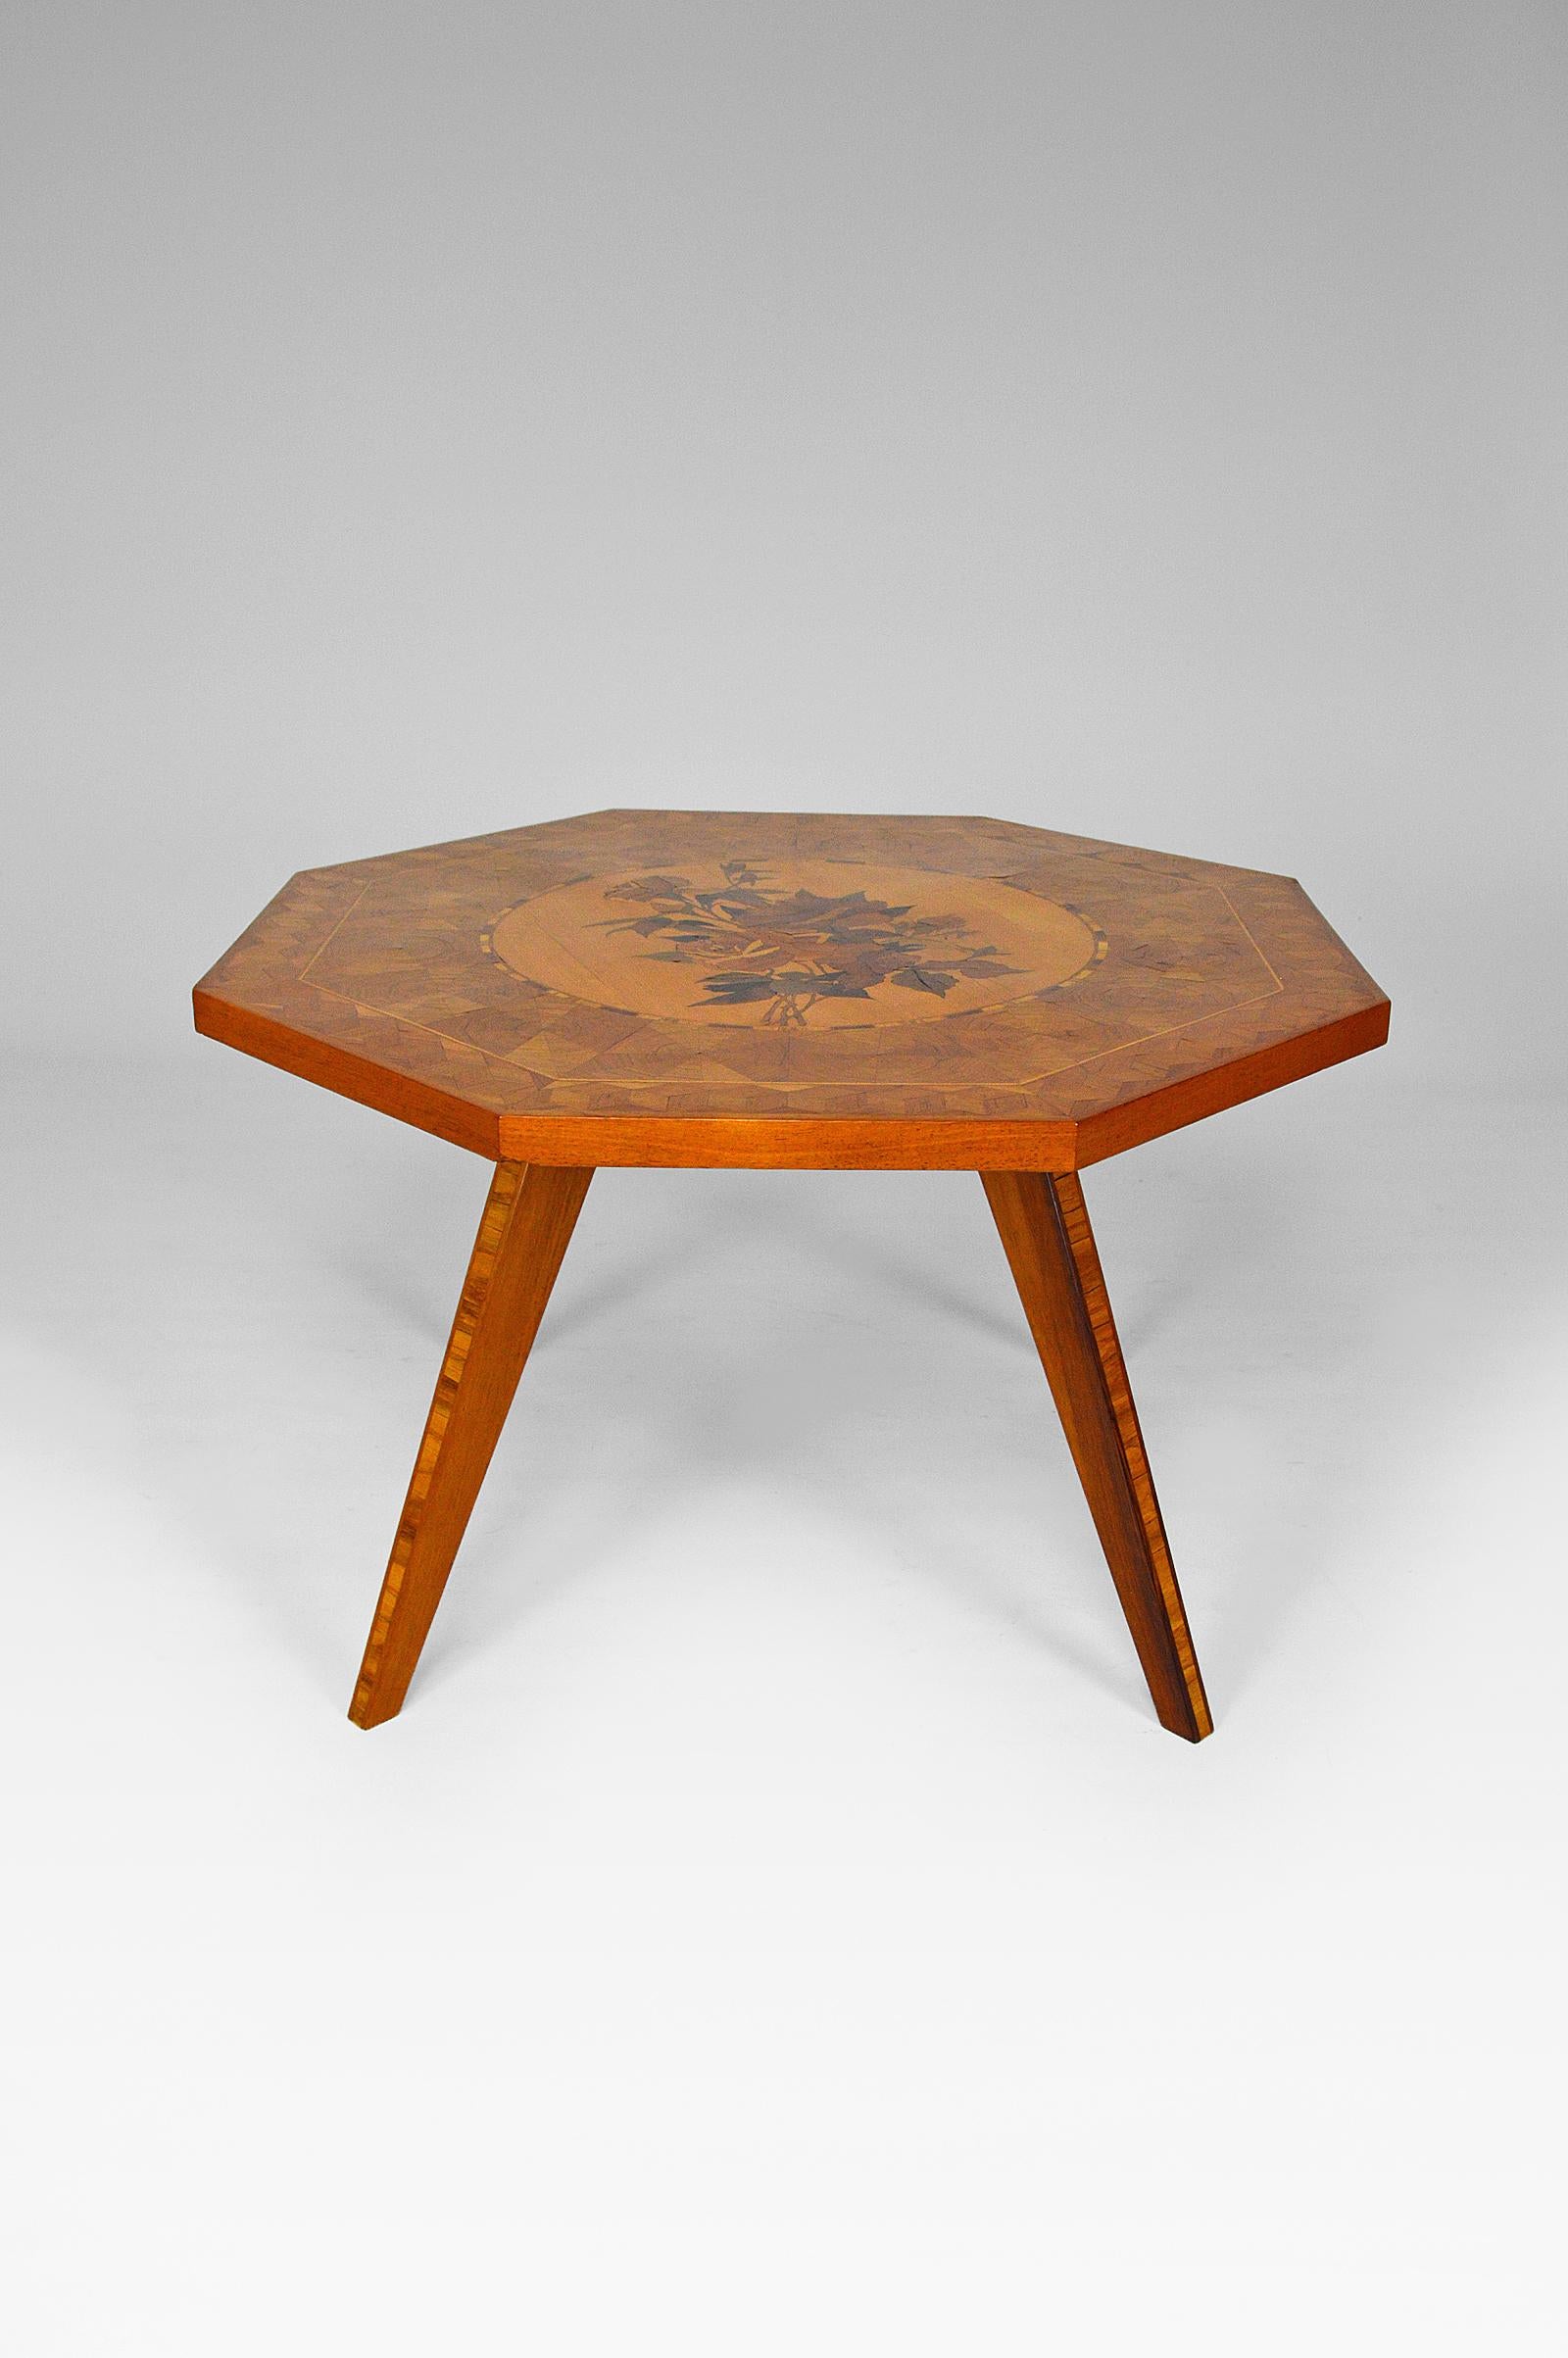 Wood Mid-Century Modern Italian Floral Inlaid Round Coffee / Side Table / Gueridon For Sale